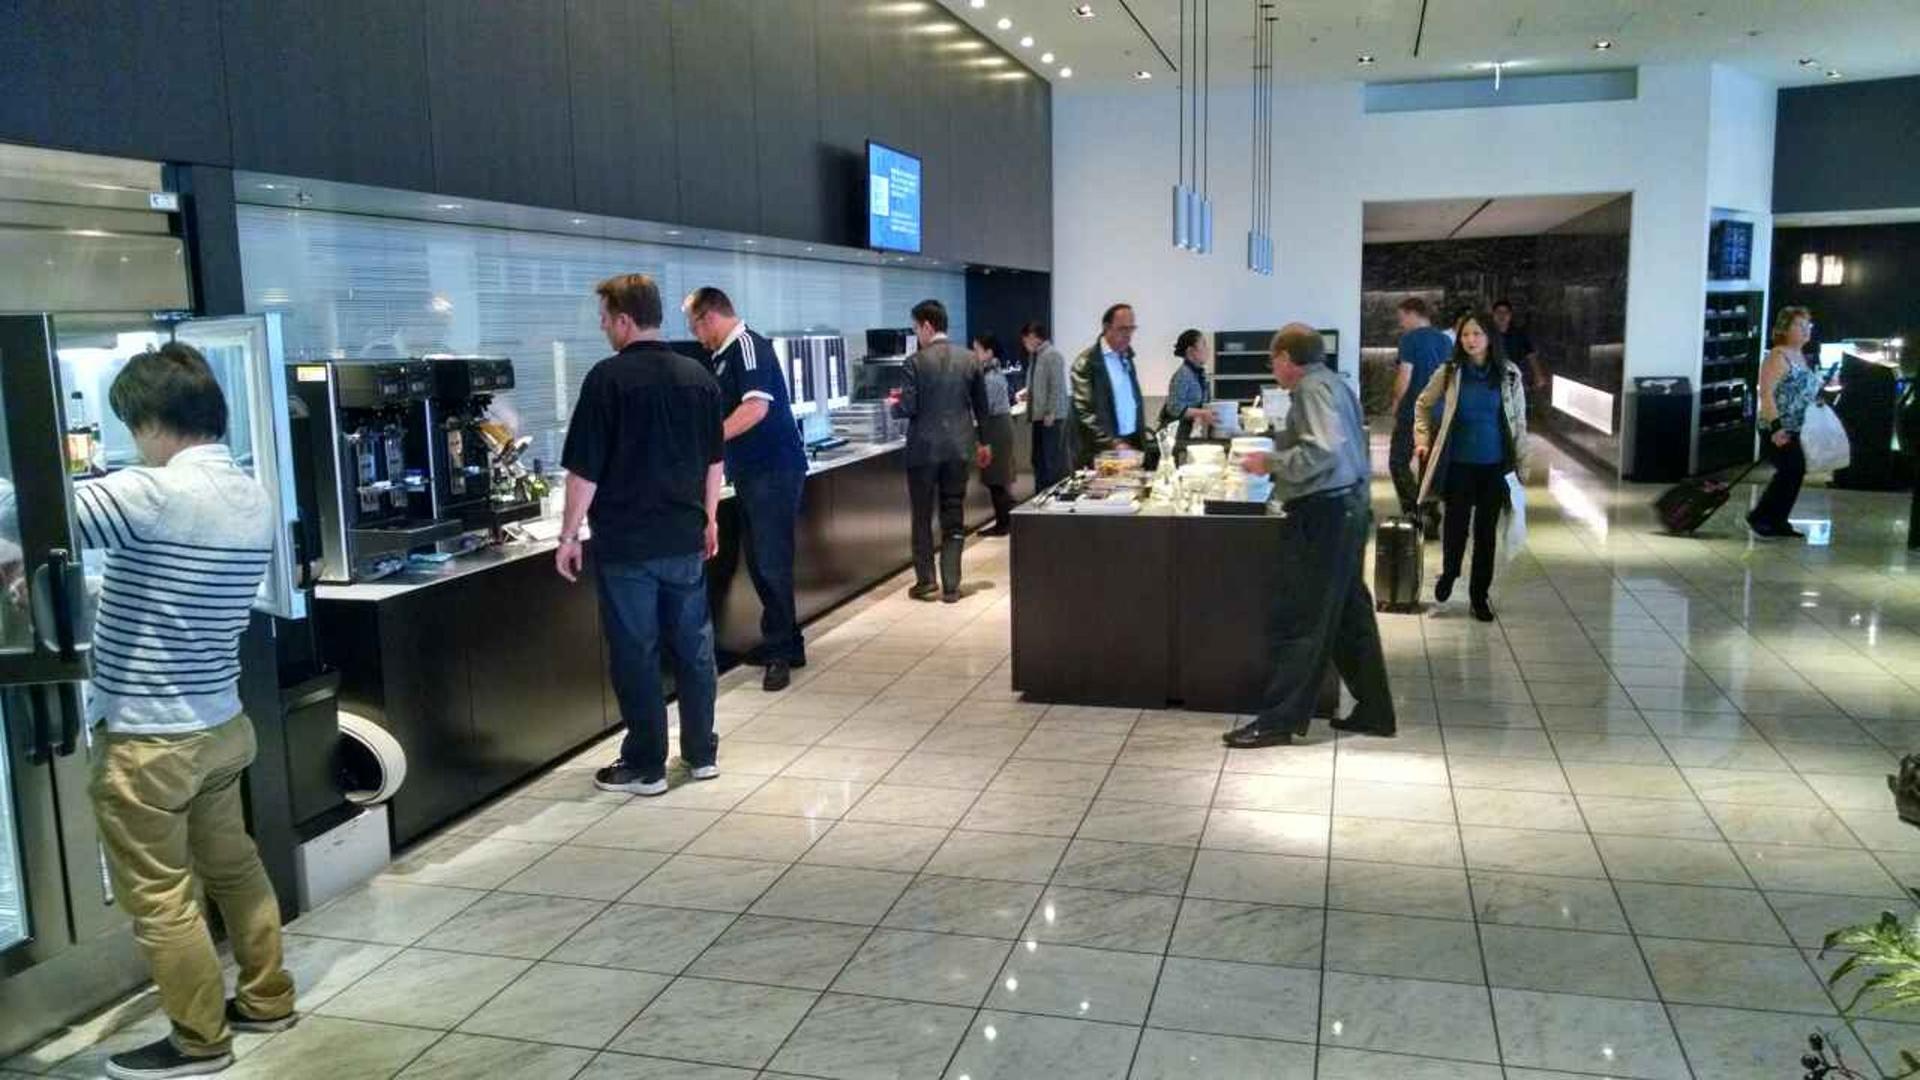 All Nippon Airways ANA Lounge image 18 of 39